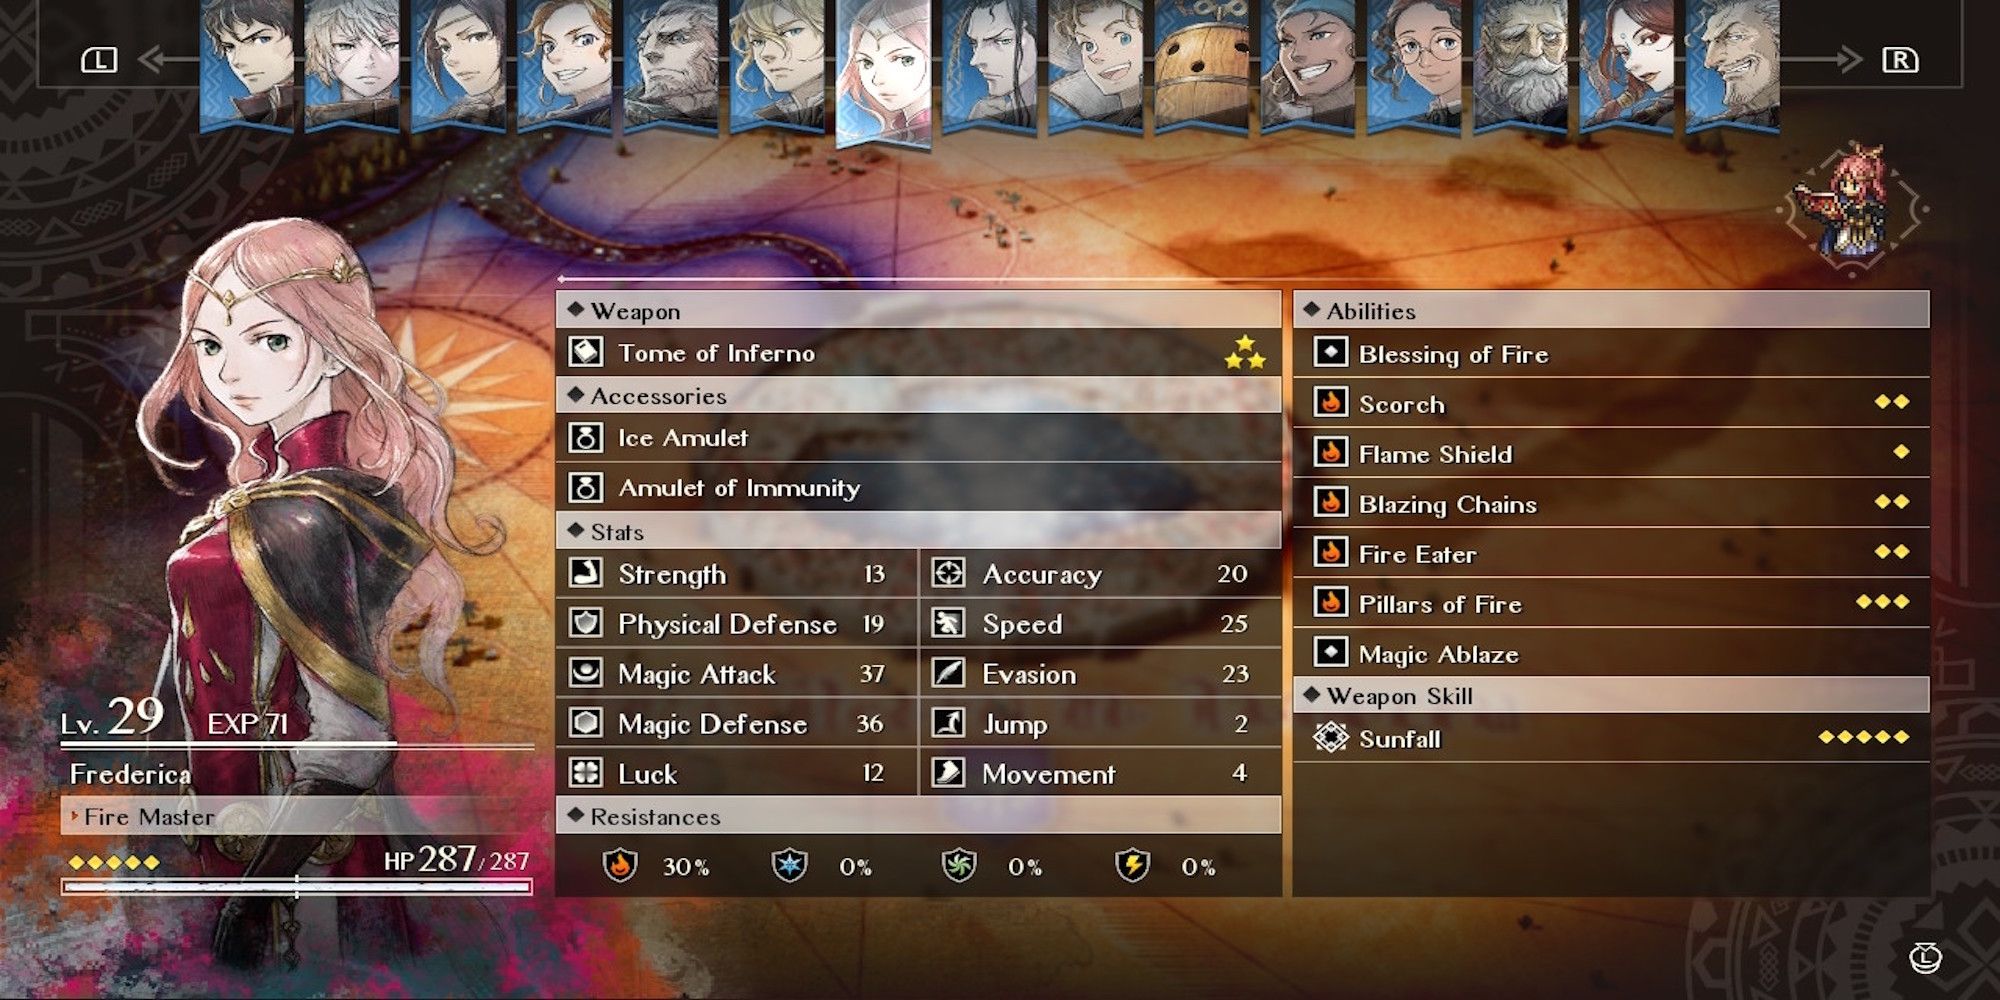 Frederica in the roster menu from Triangle Strategy